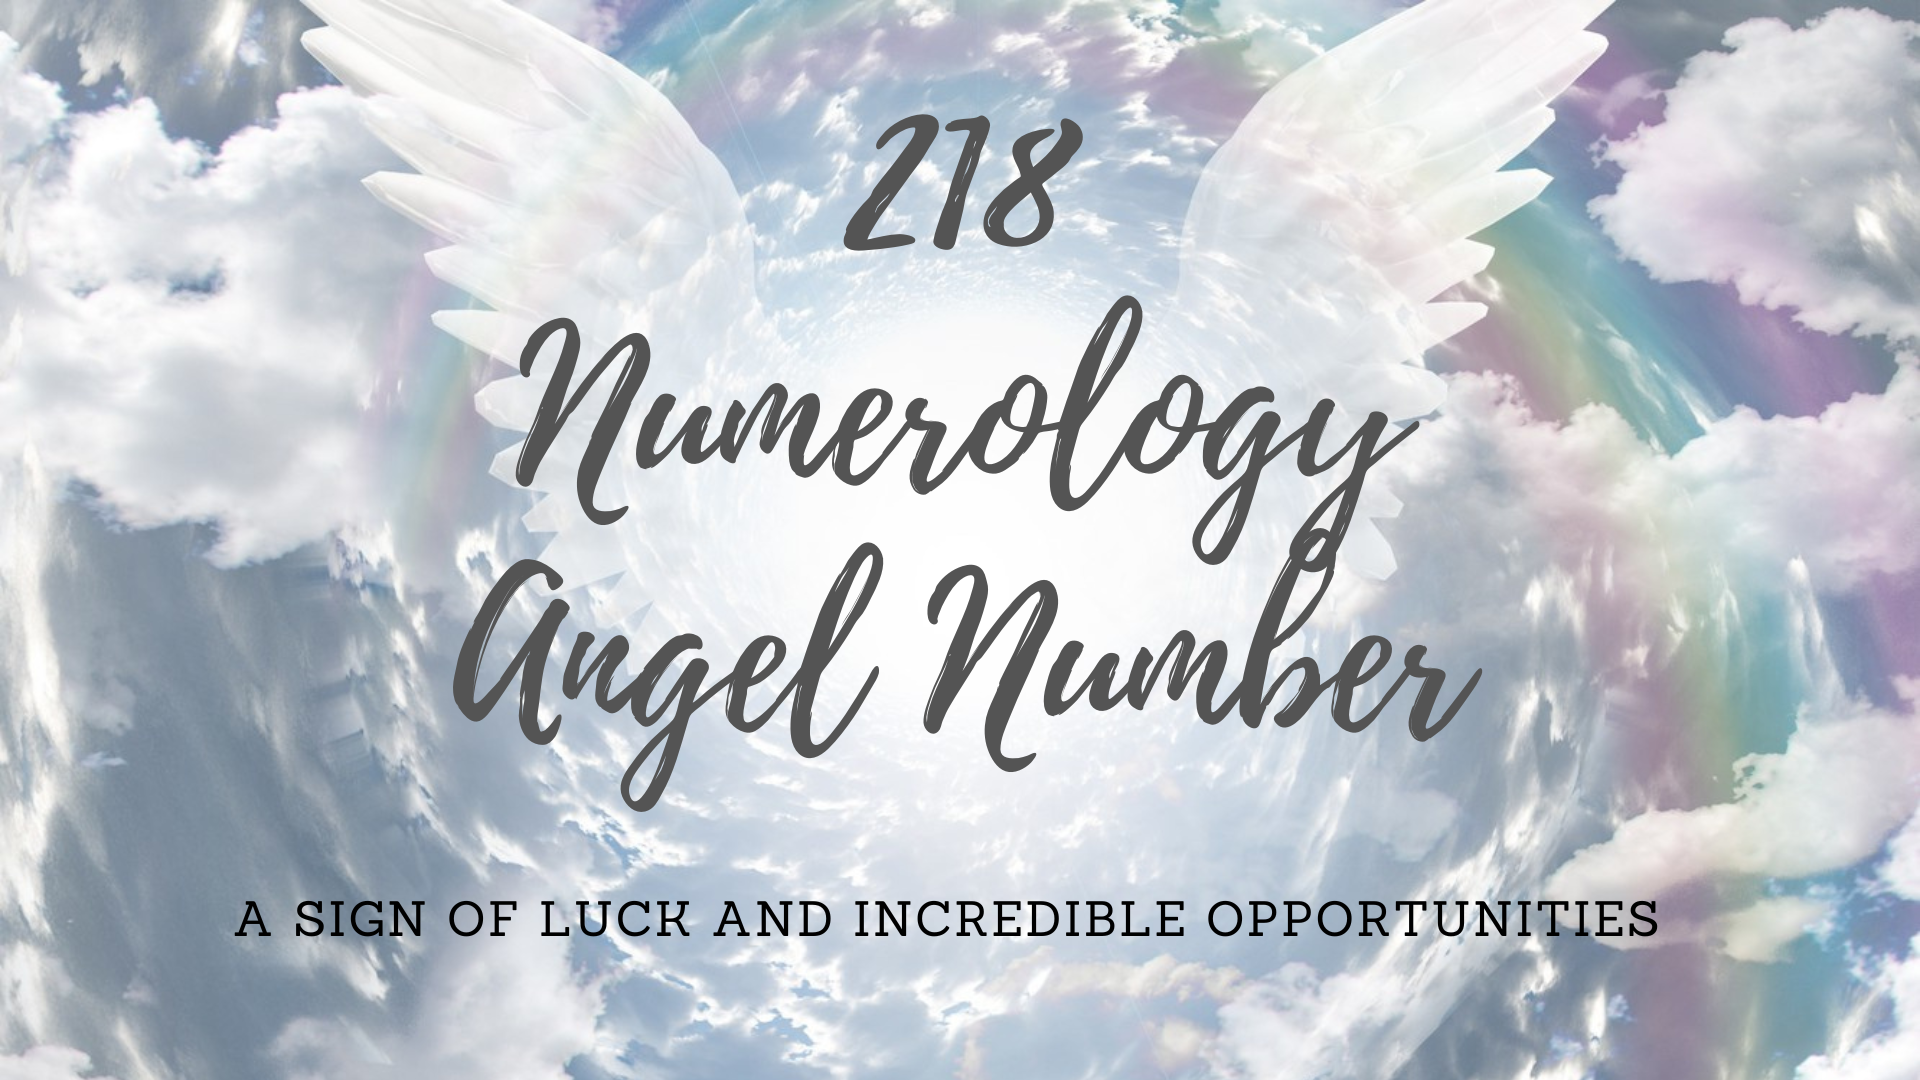 218 Numerology Angel Number - A Sign Of Luck And Incredible Opportunities